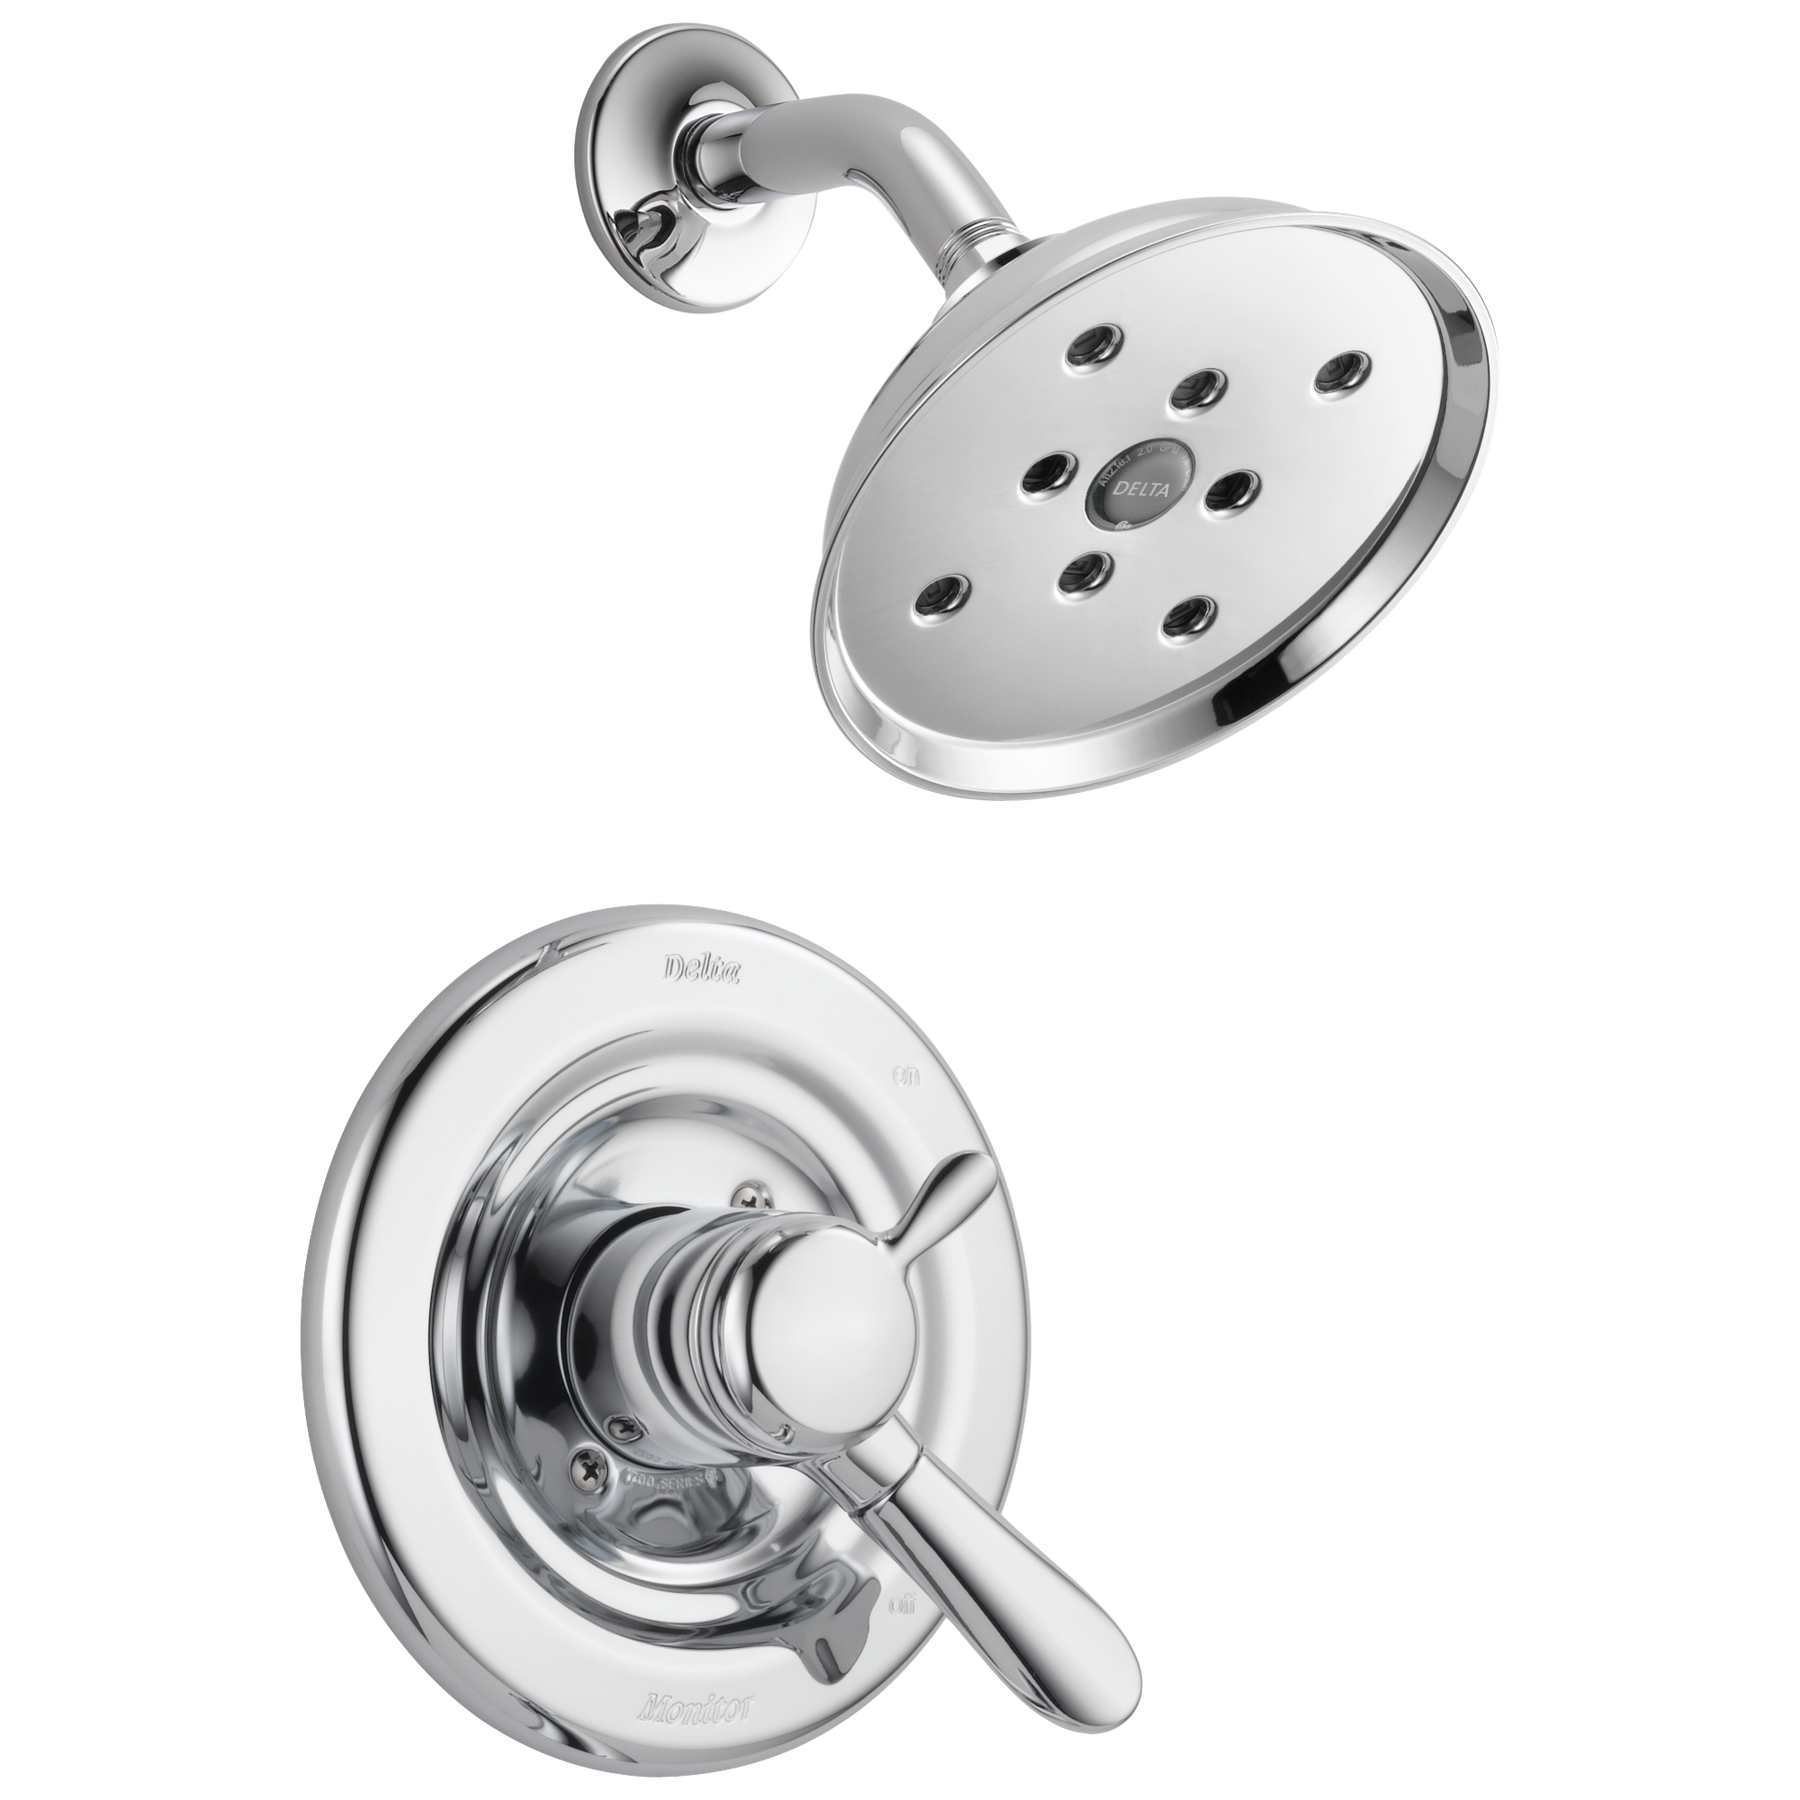 Monitor® 17 Series H2Okinetic® Shower Trim in Chrome T17238-H2O